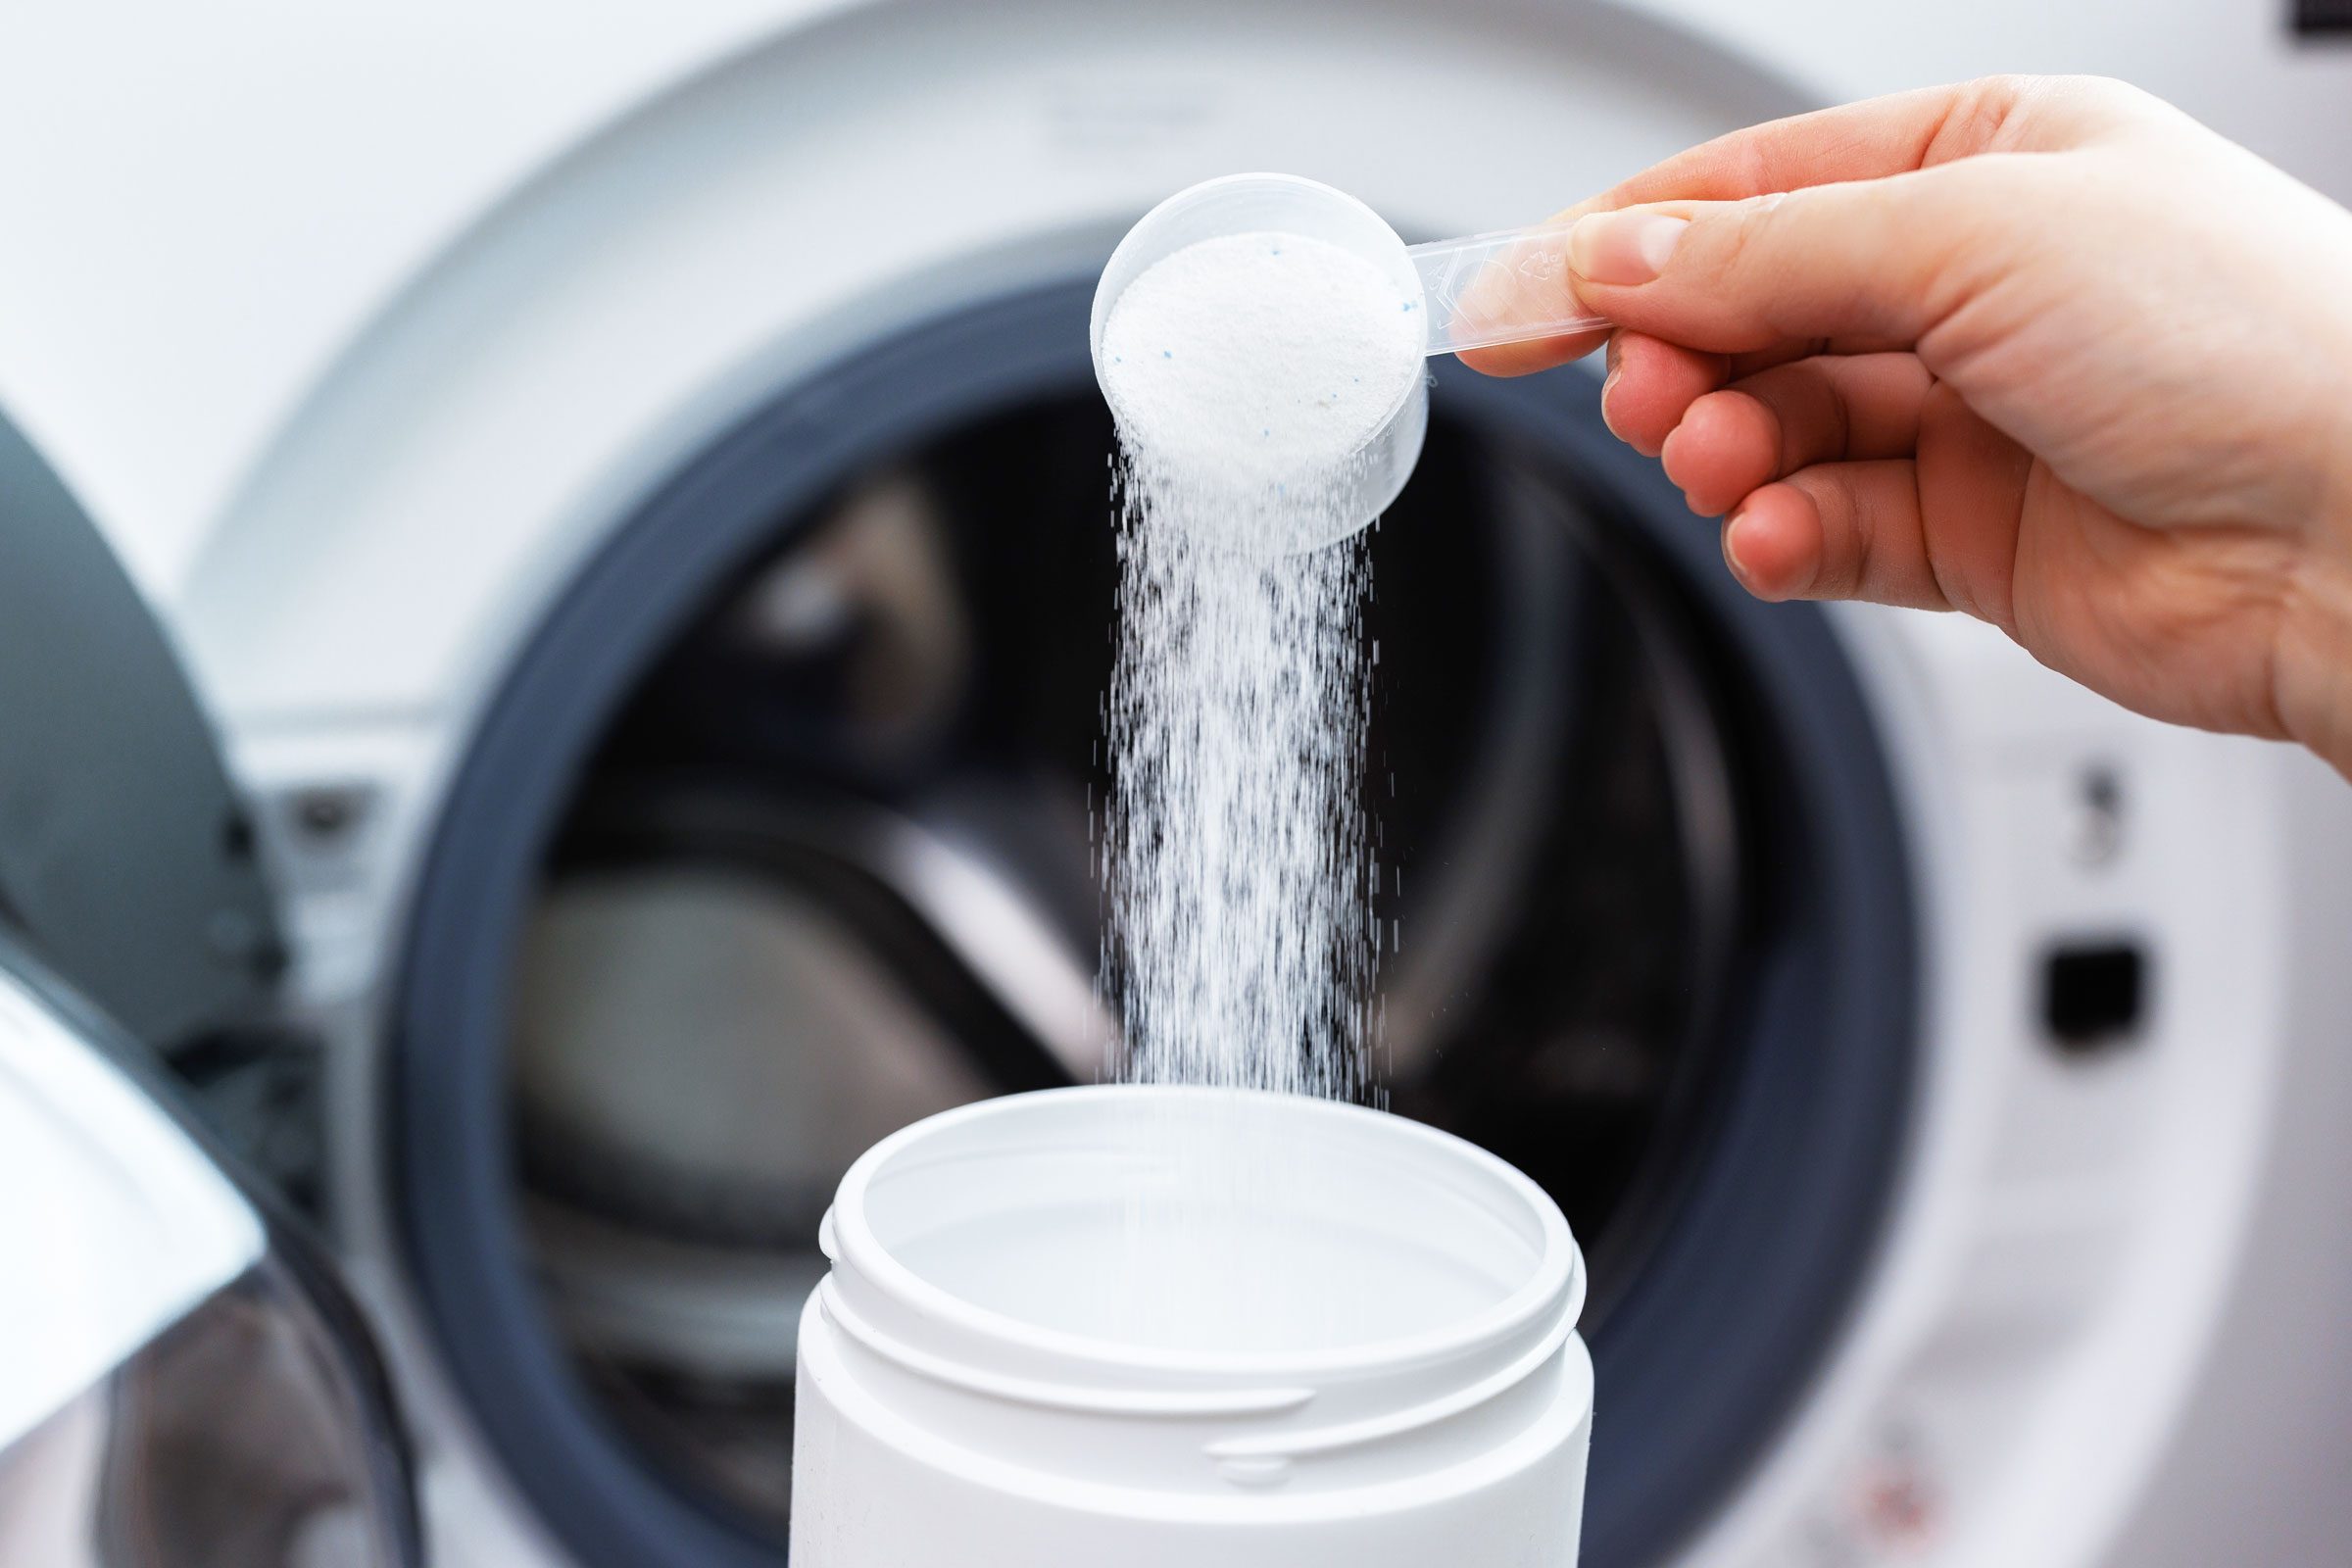 How To Use Bleach in Laundry the Right Way